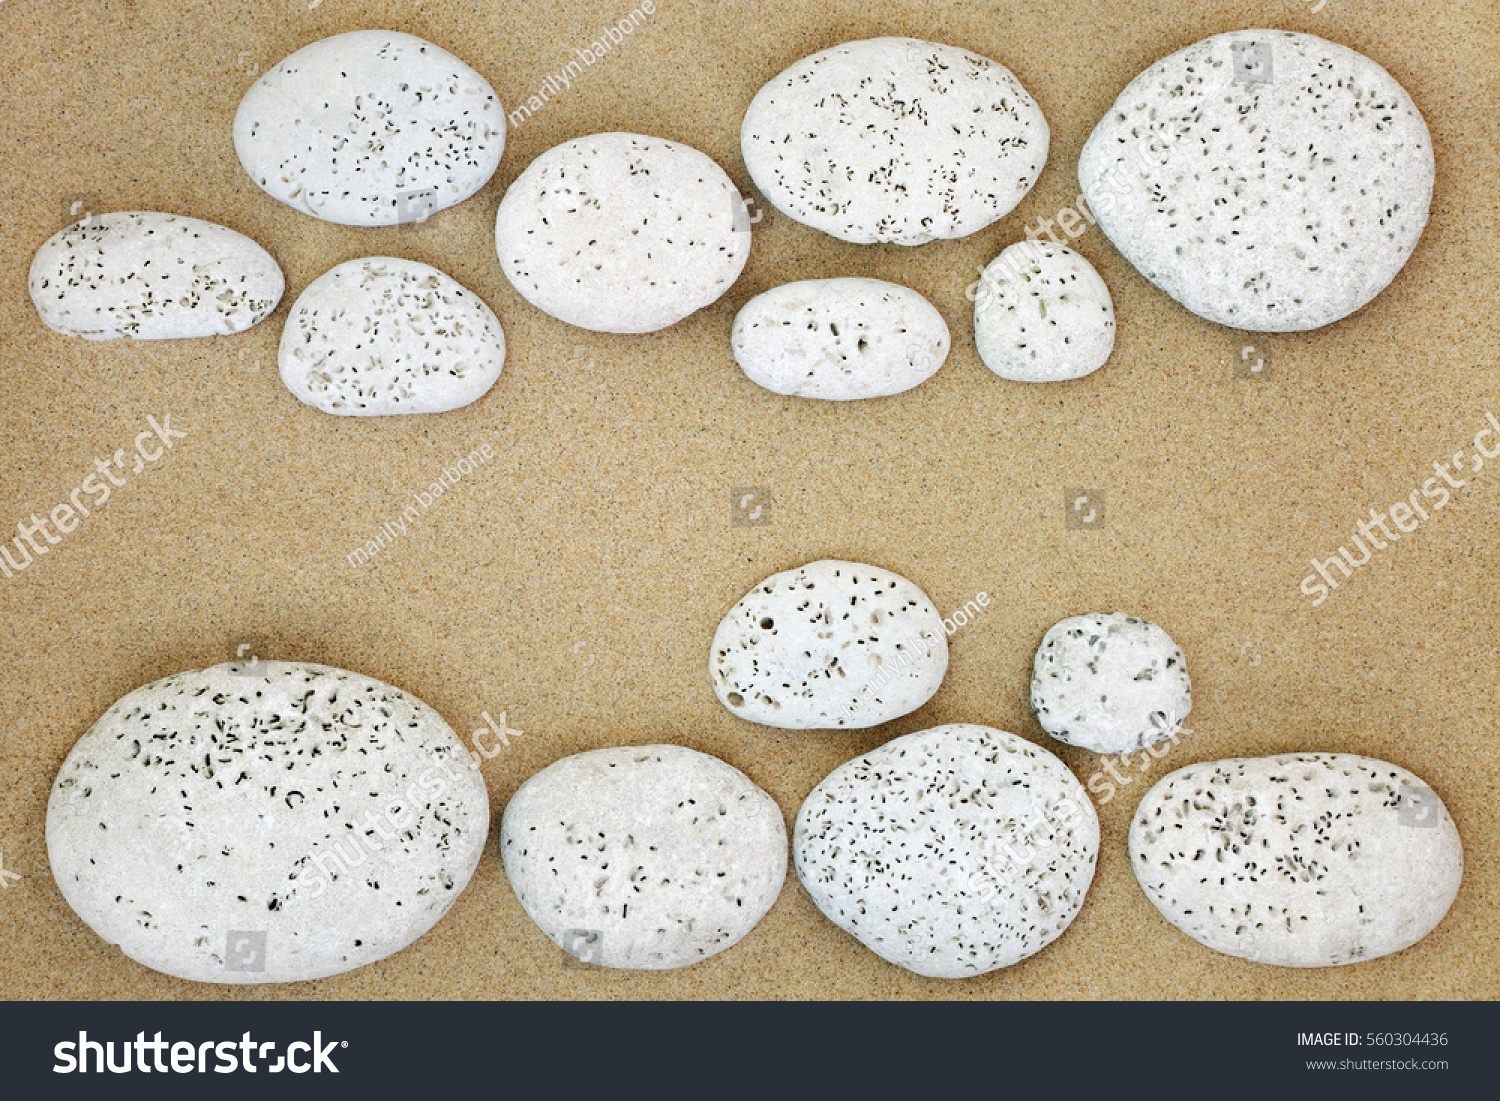 Abstract beach background on sand with white stones with bore holes made by bivalve molluscs. #560304436